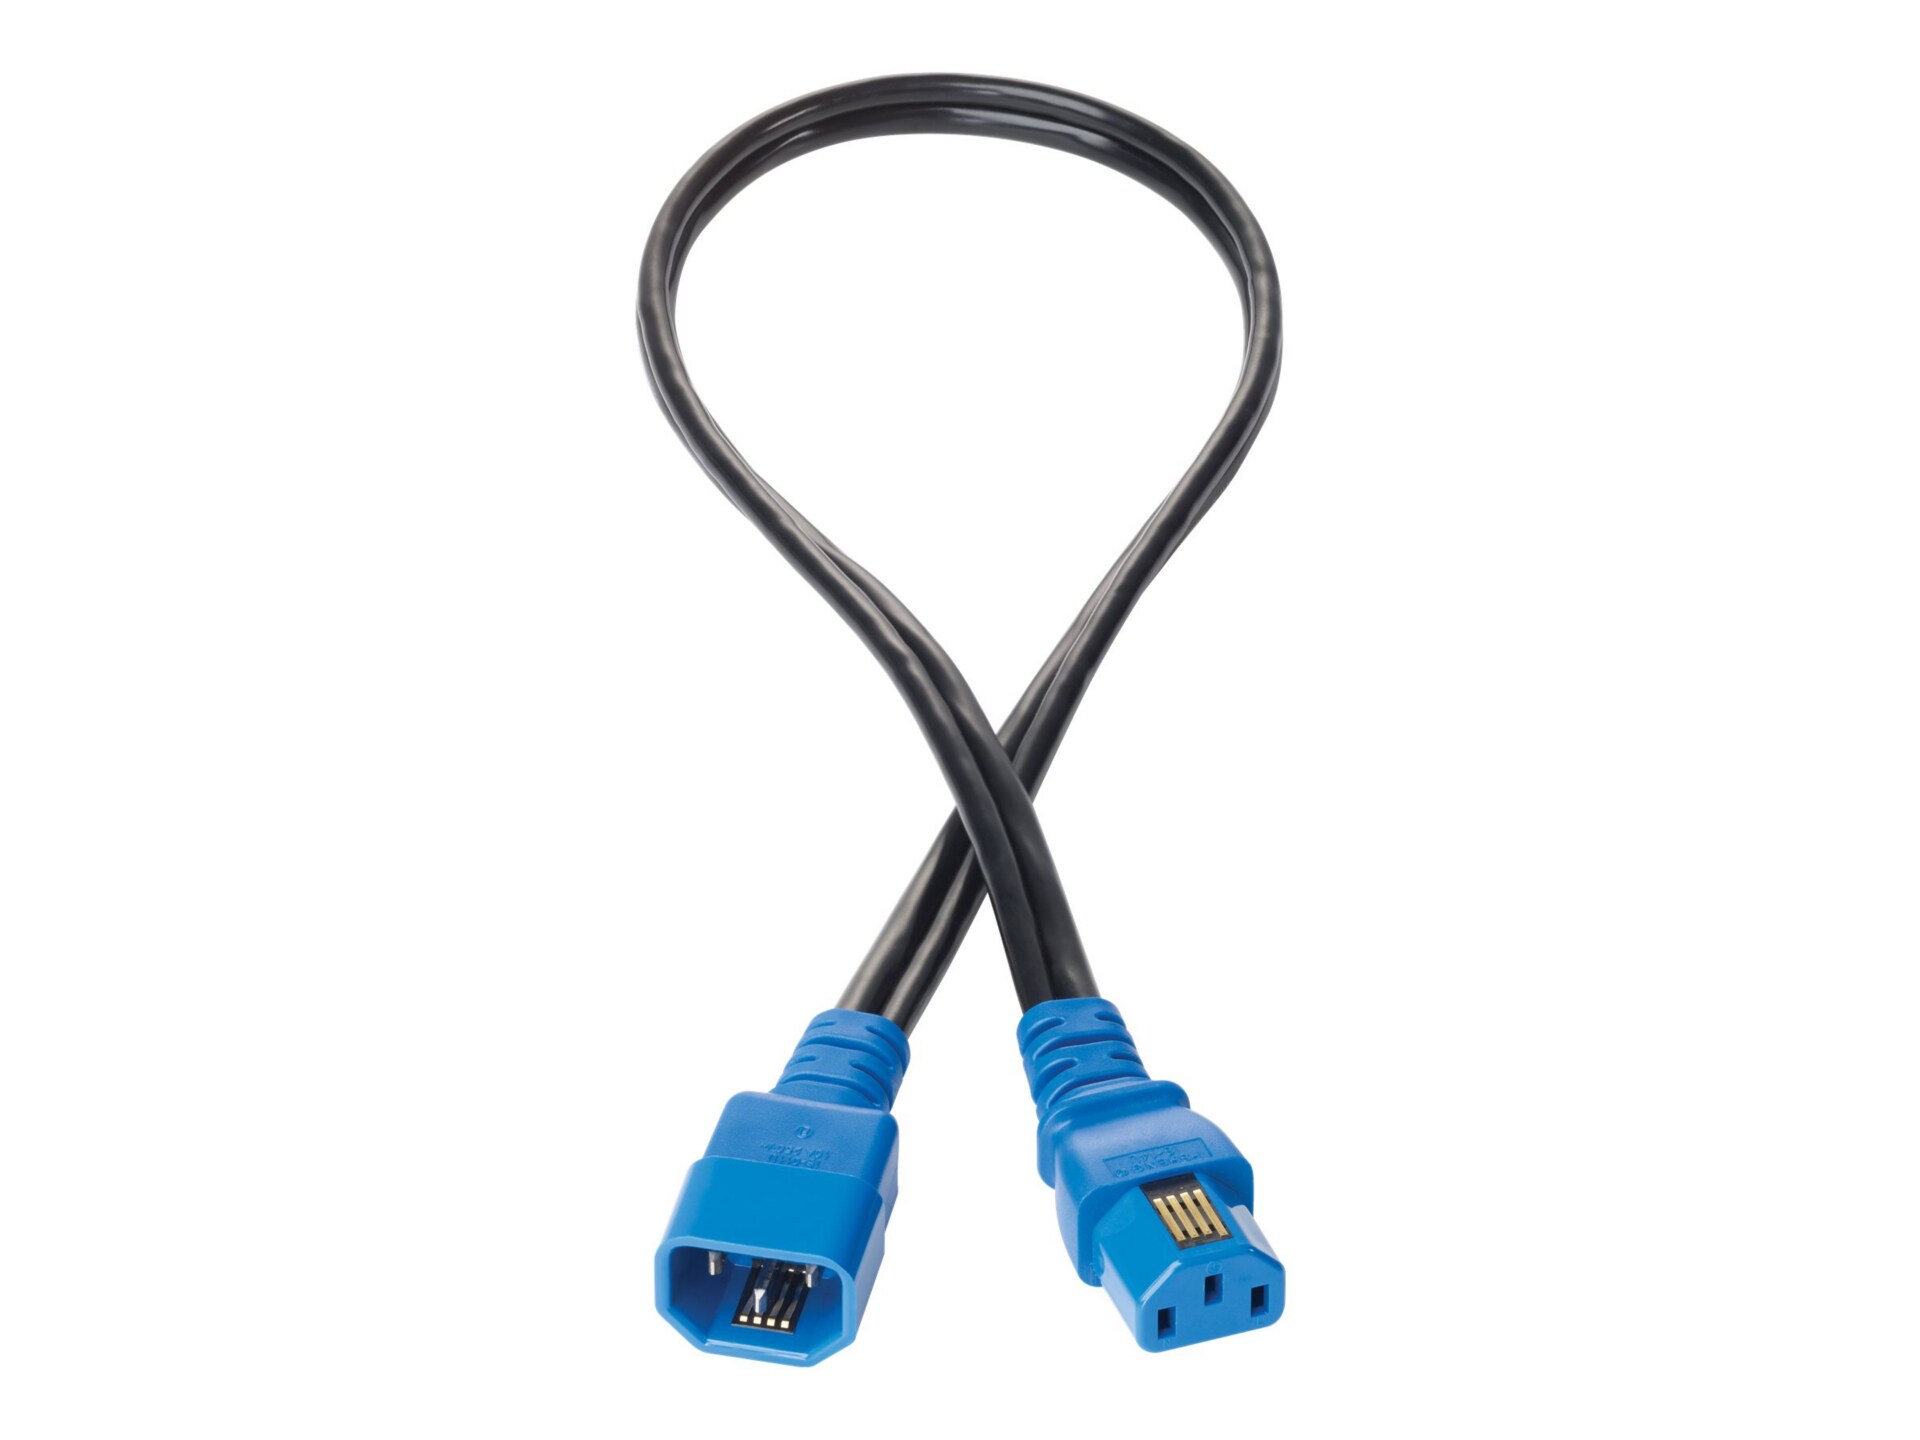 HPE Jumper Cord - power cable - IEC 60320 C14 to IEC 60320 C15 - 2.5 m